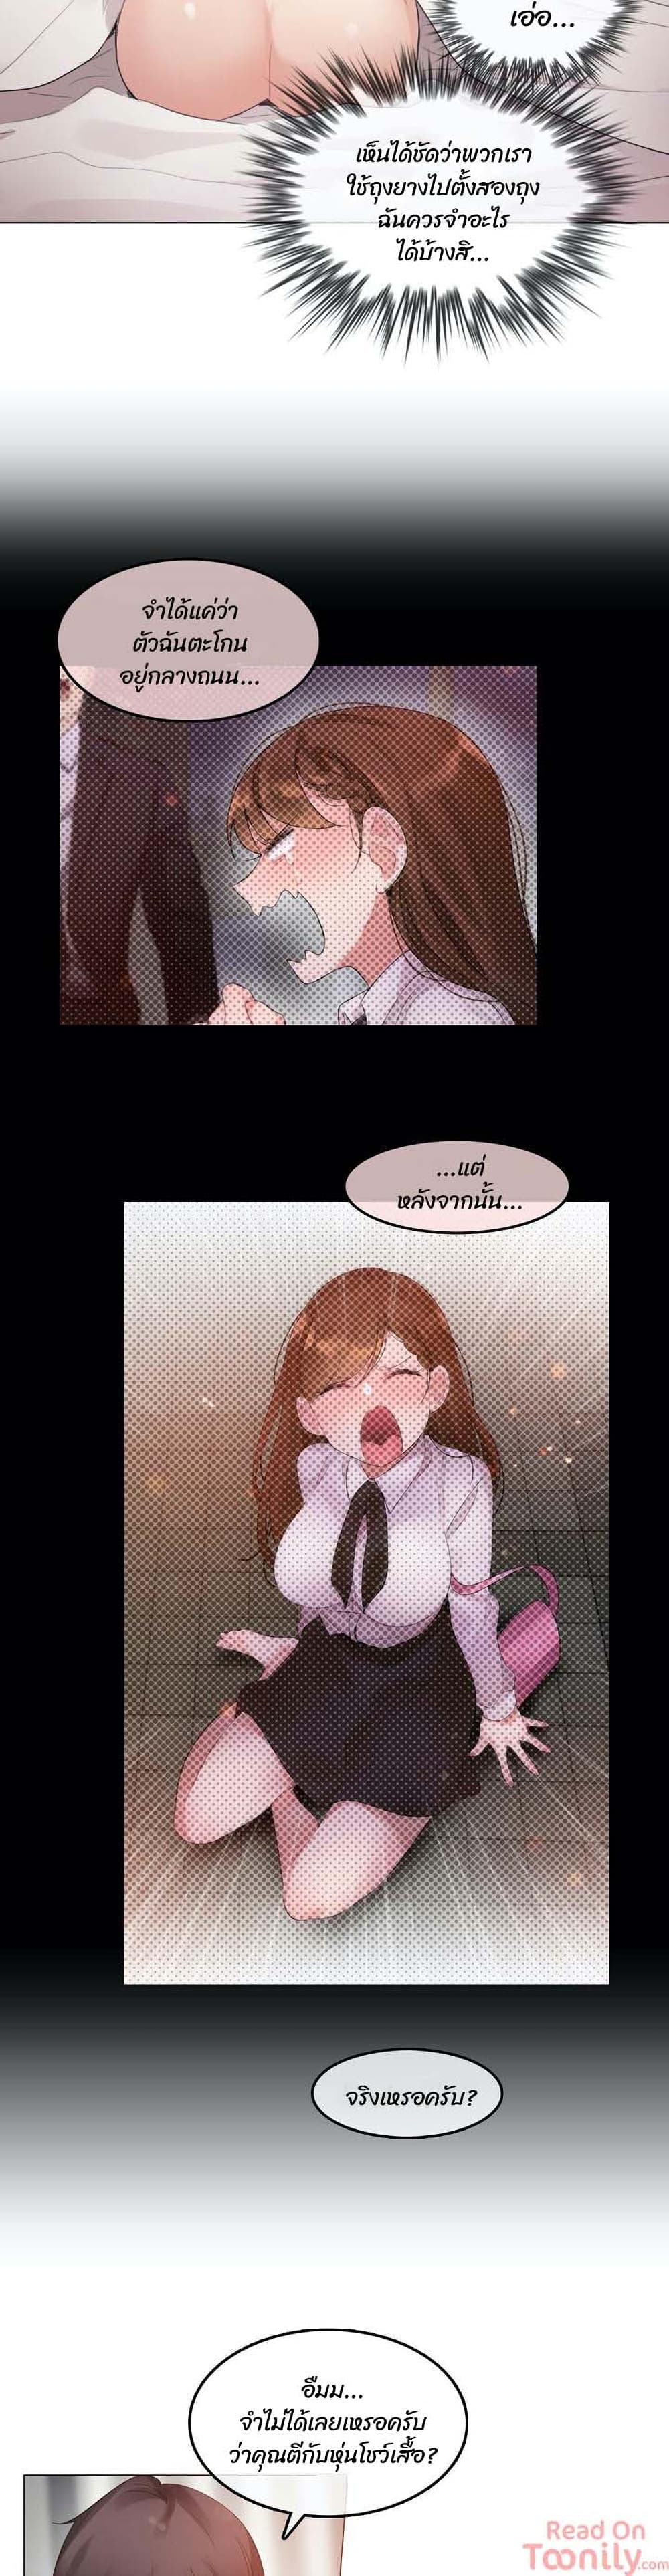 A Pervert’s Daily Life05